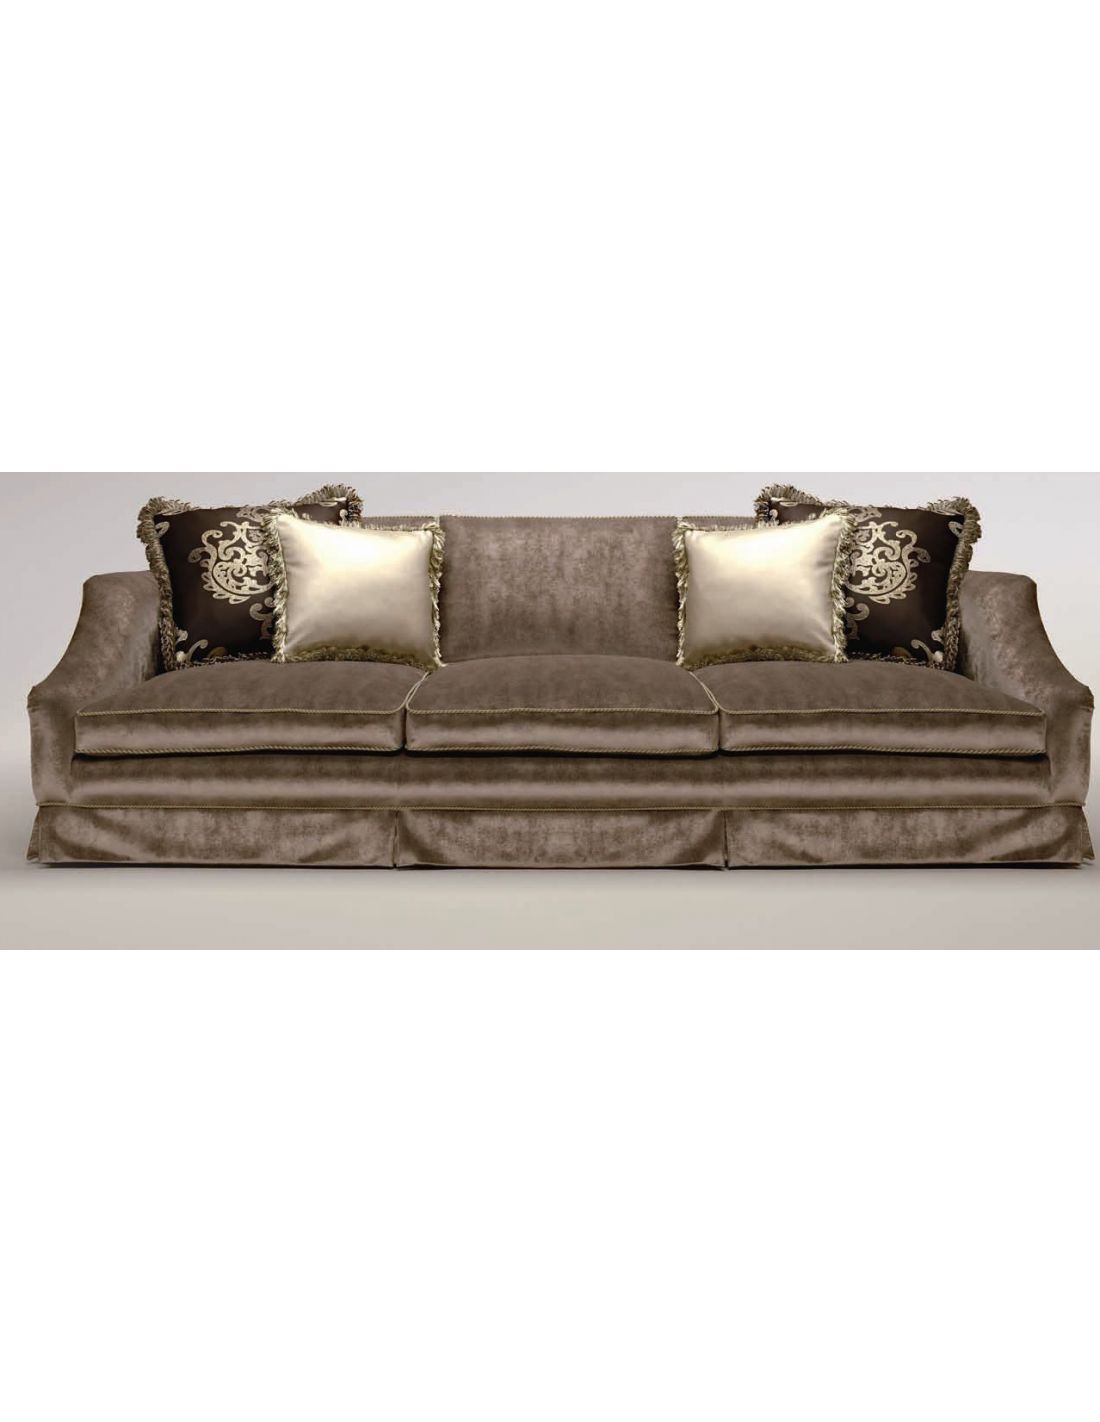 Upholstered Sofa With Curved Arms In Sofas With Curved Arms (View 15 of 20)